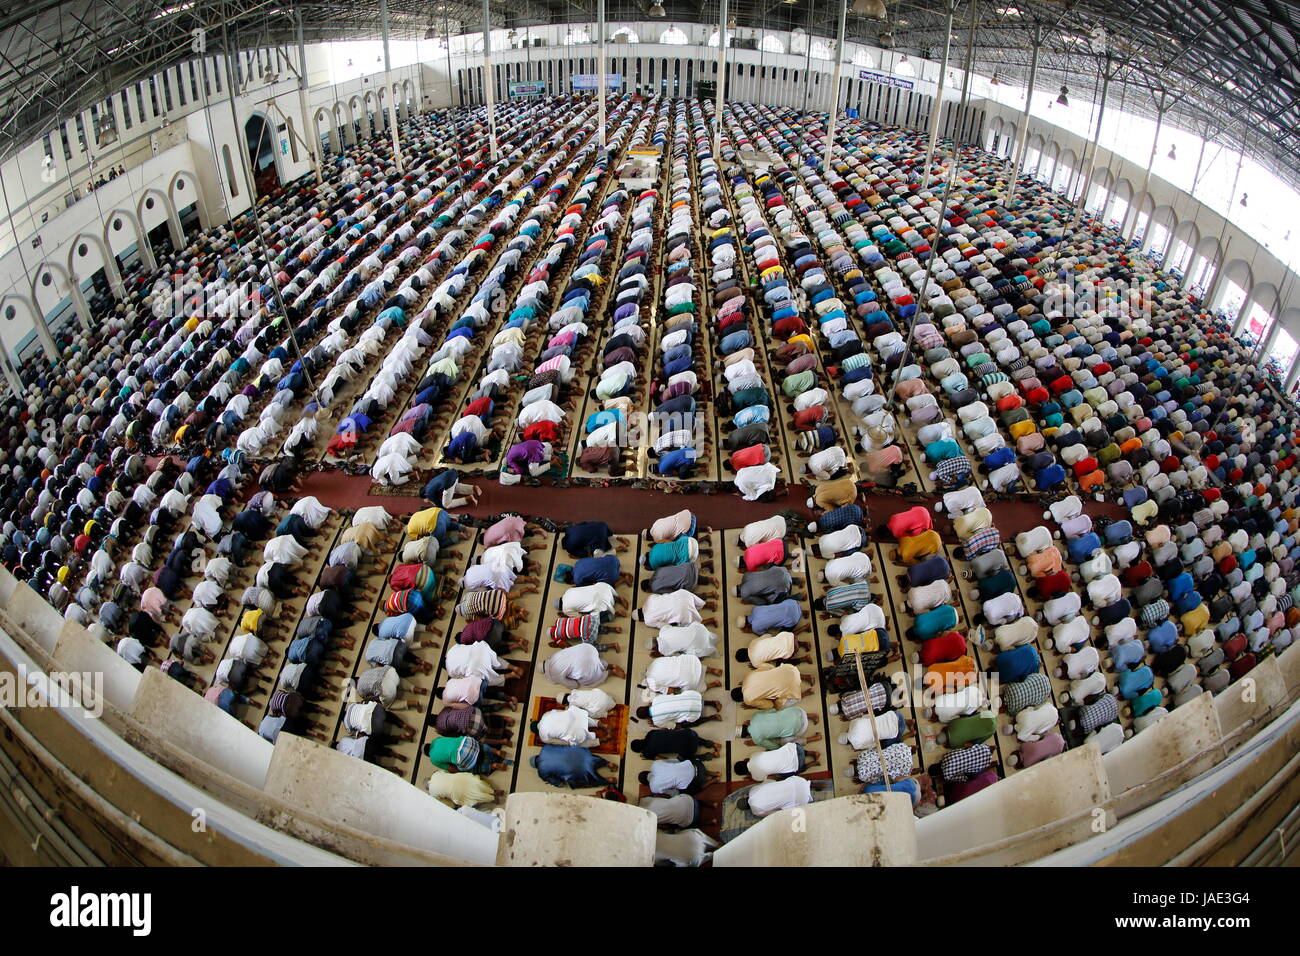 Devotees offer the Jummah prayers at the Baitul Mukarram National Mosque in Dhaka on the first Friday of the month of Ramadan. Dhaka, Bangladesh Stock Photo